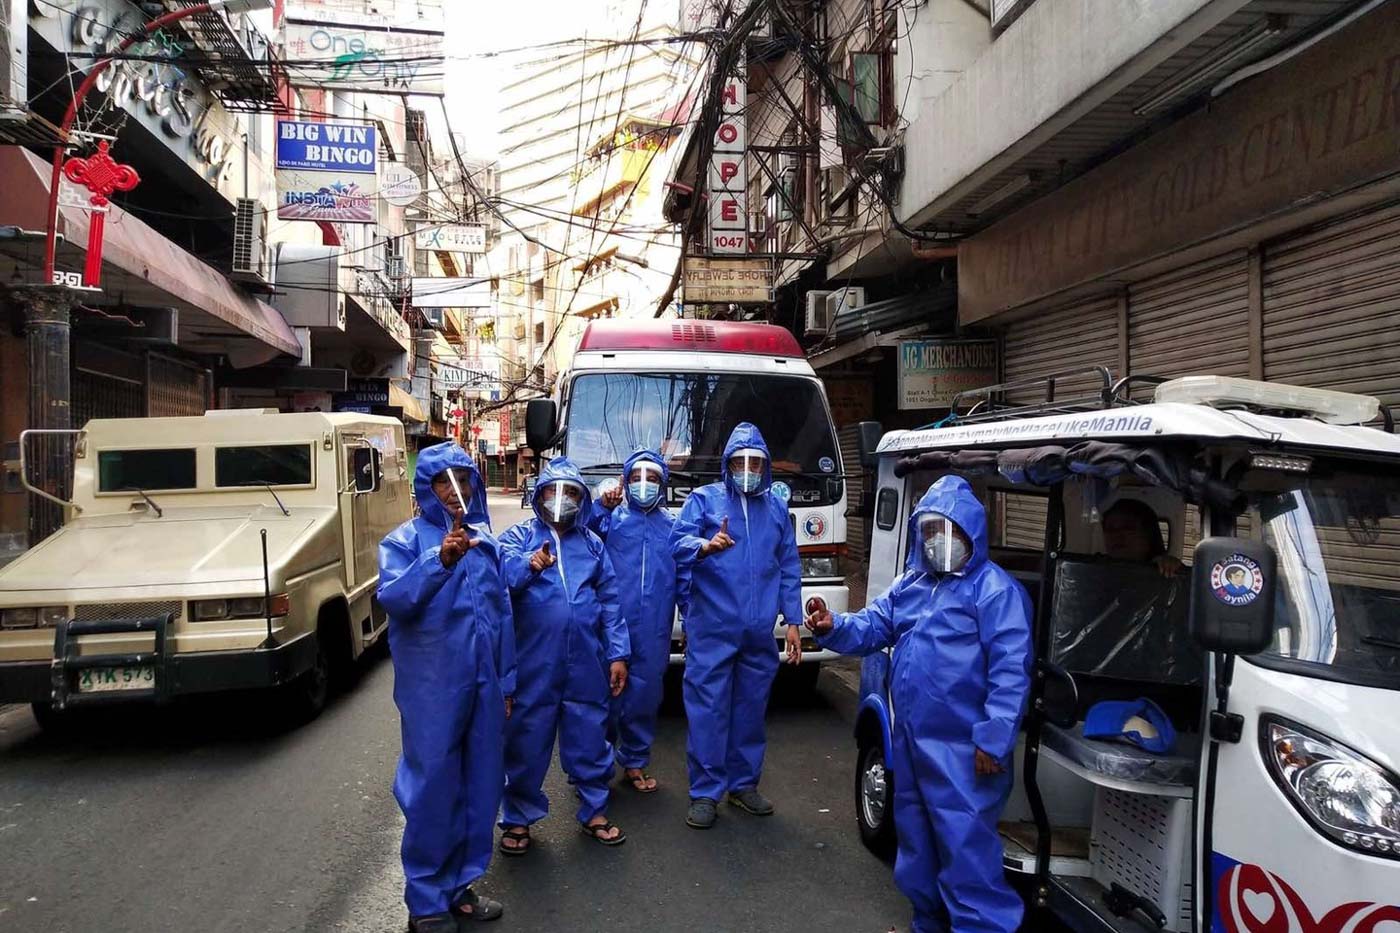 REUSABLE. Firefighters, who also help administer disinfection and community feeding programs, in reusable protective coveralls in Tondo, Manila. Photo by Crispian Lao/PARMS  